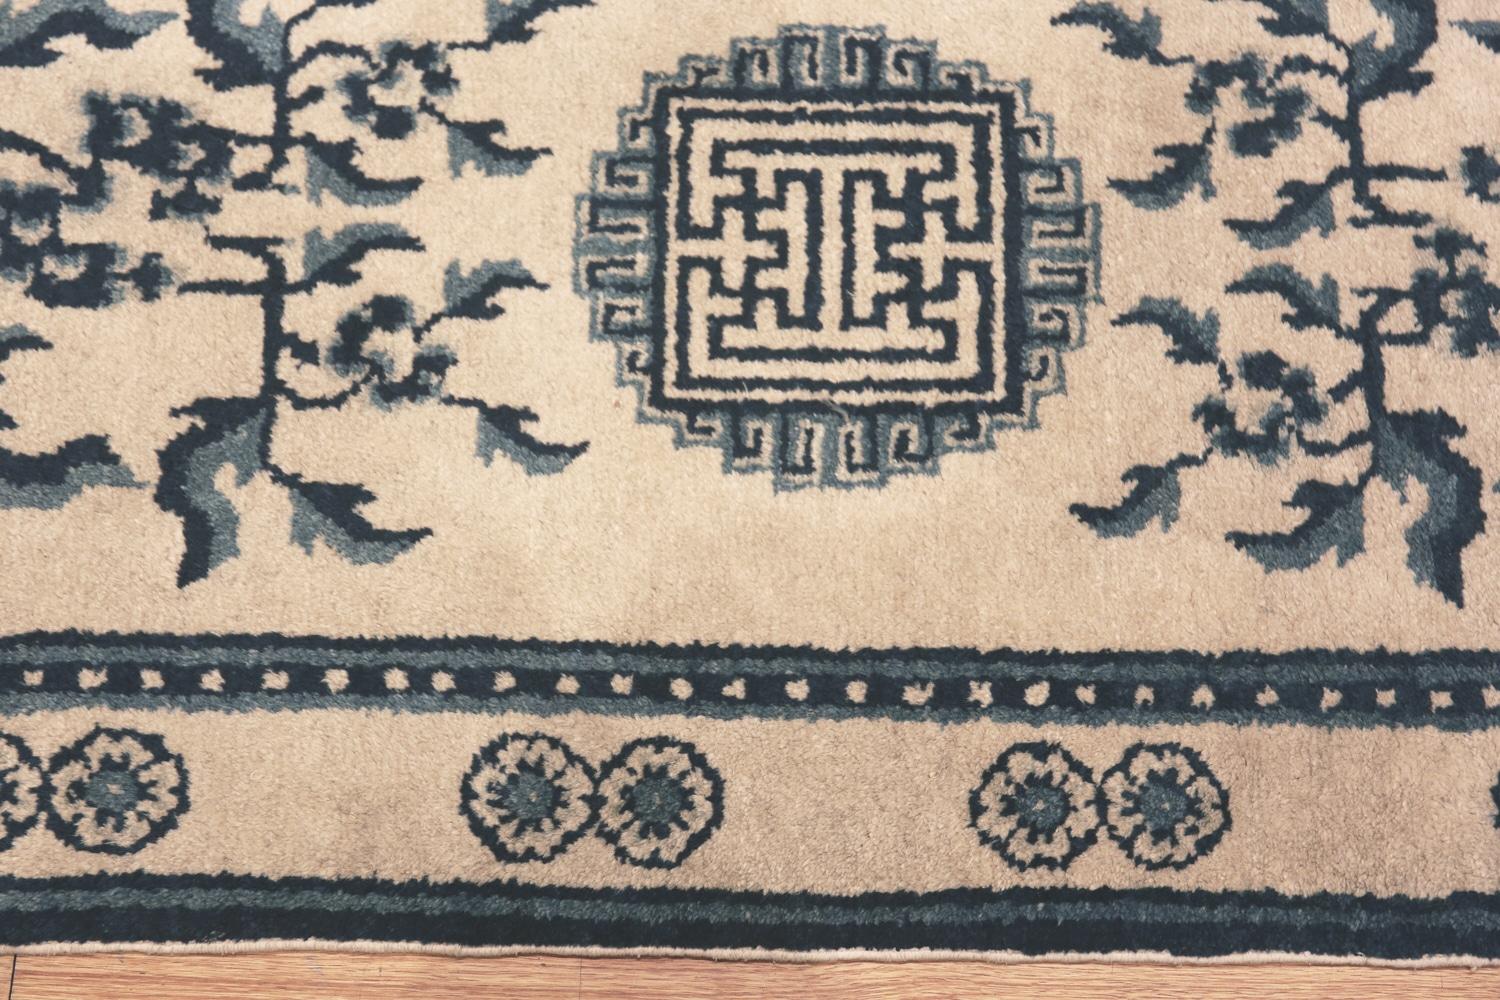 Gorgeous Ivory Background Antique Chinese Rug, Country of Origin: China, Circa Date: 1900 – This gorgeous antique Chinese rug from 1900 will make an excellent addition to an Asian themed or Chinoiserie style room. It has an earthy feel and pays